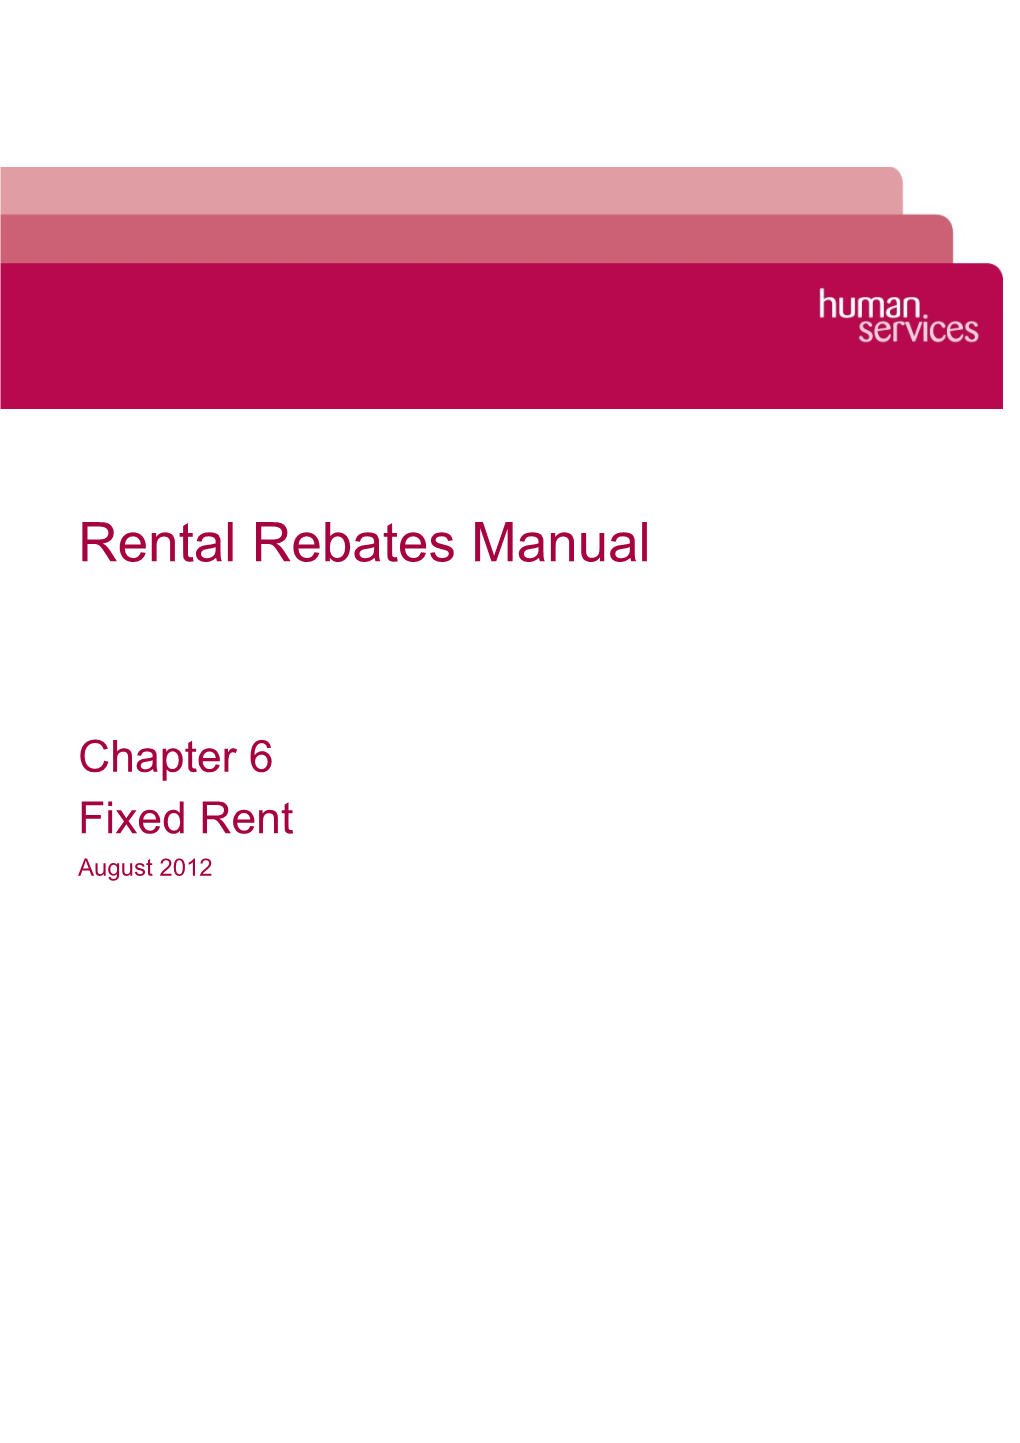 Ch 6 Fixed Rent June